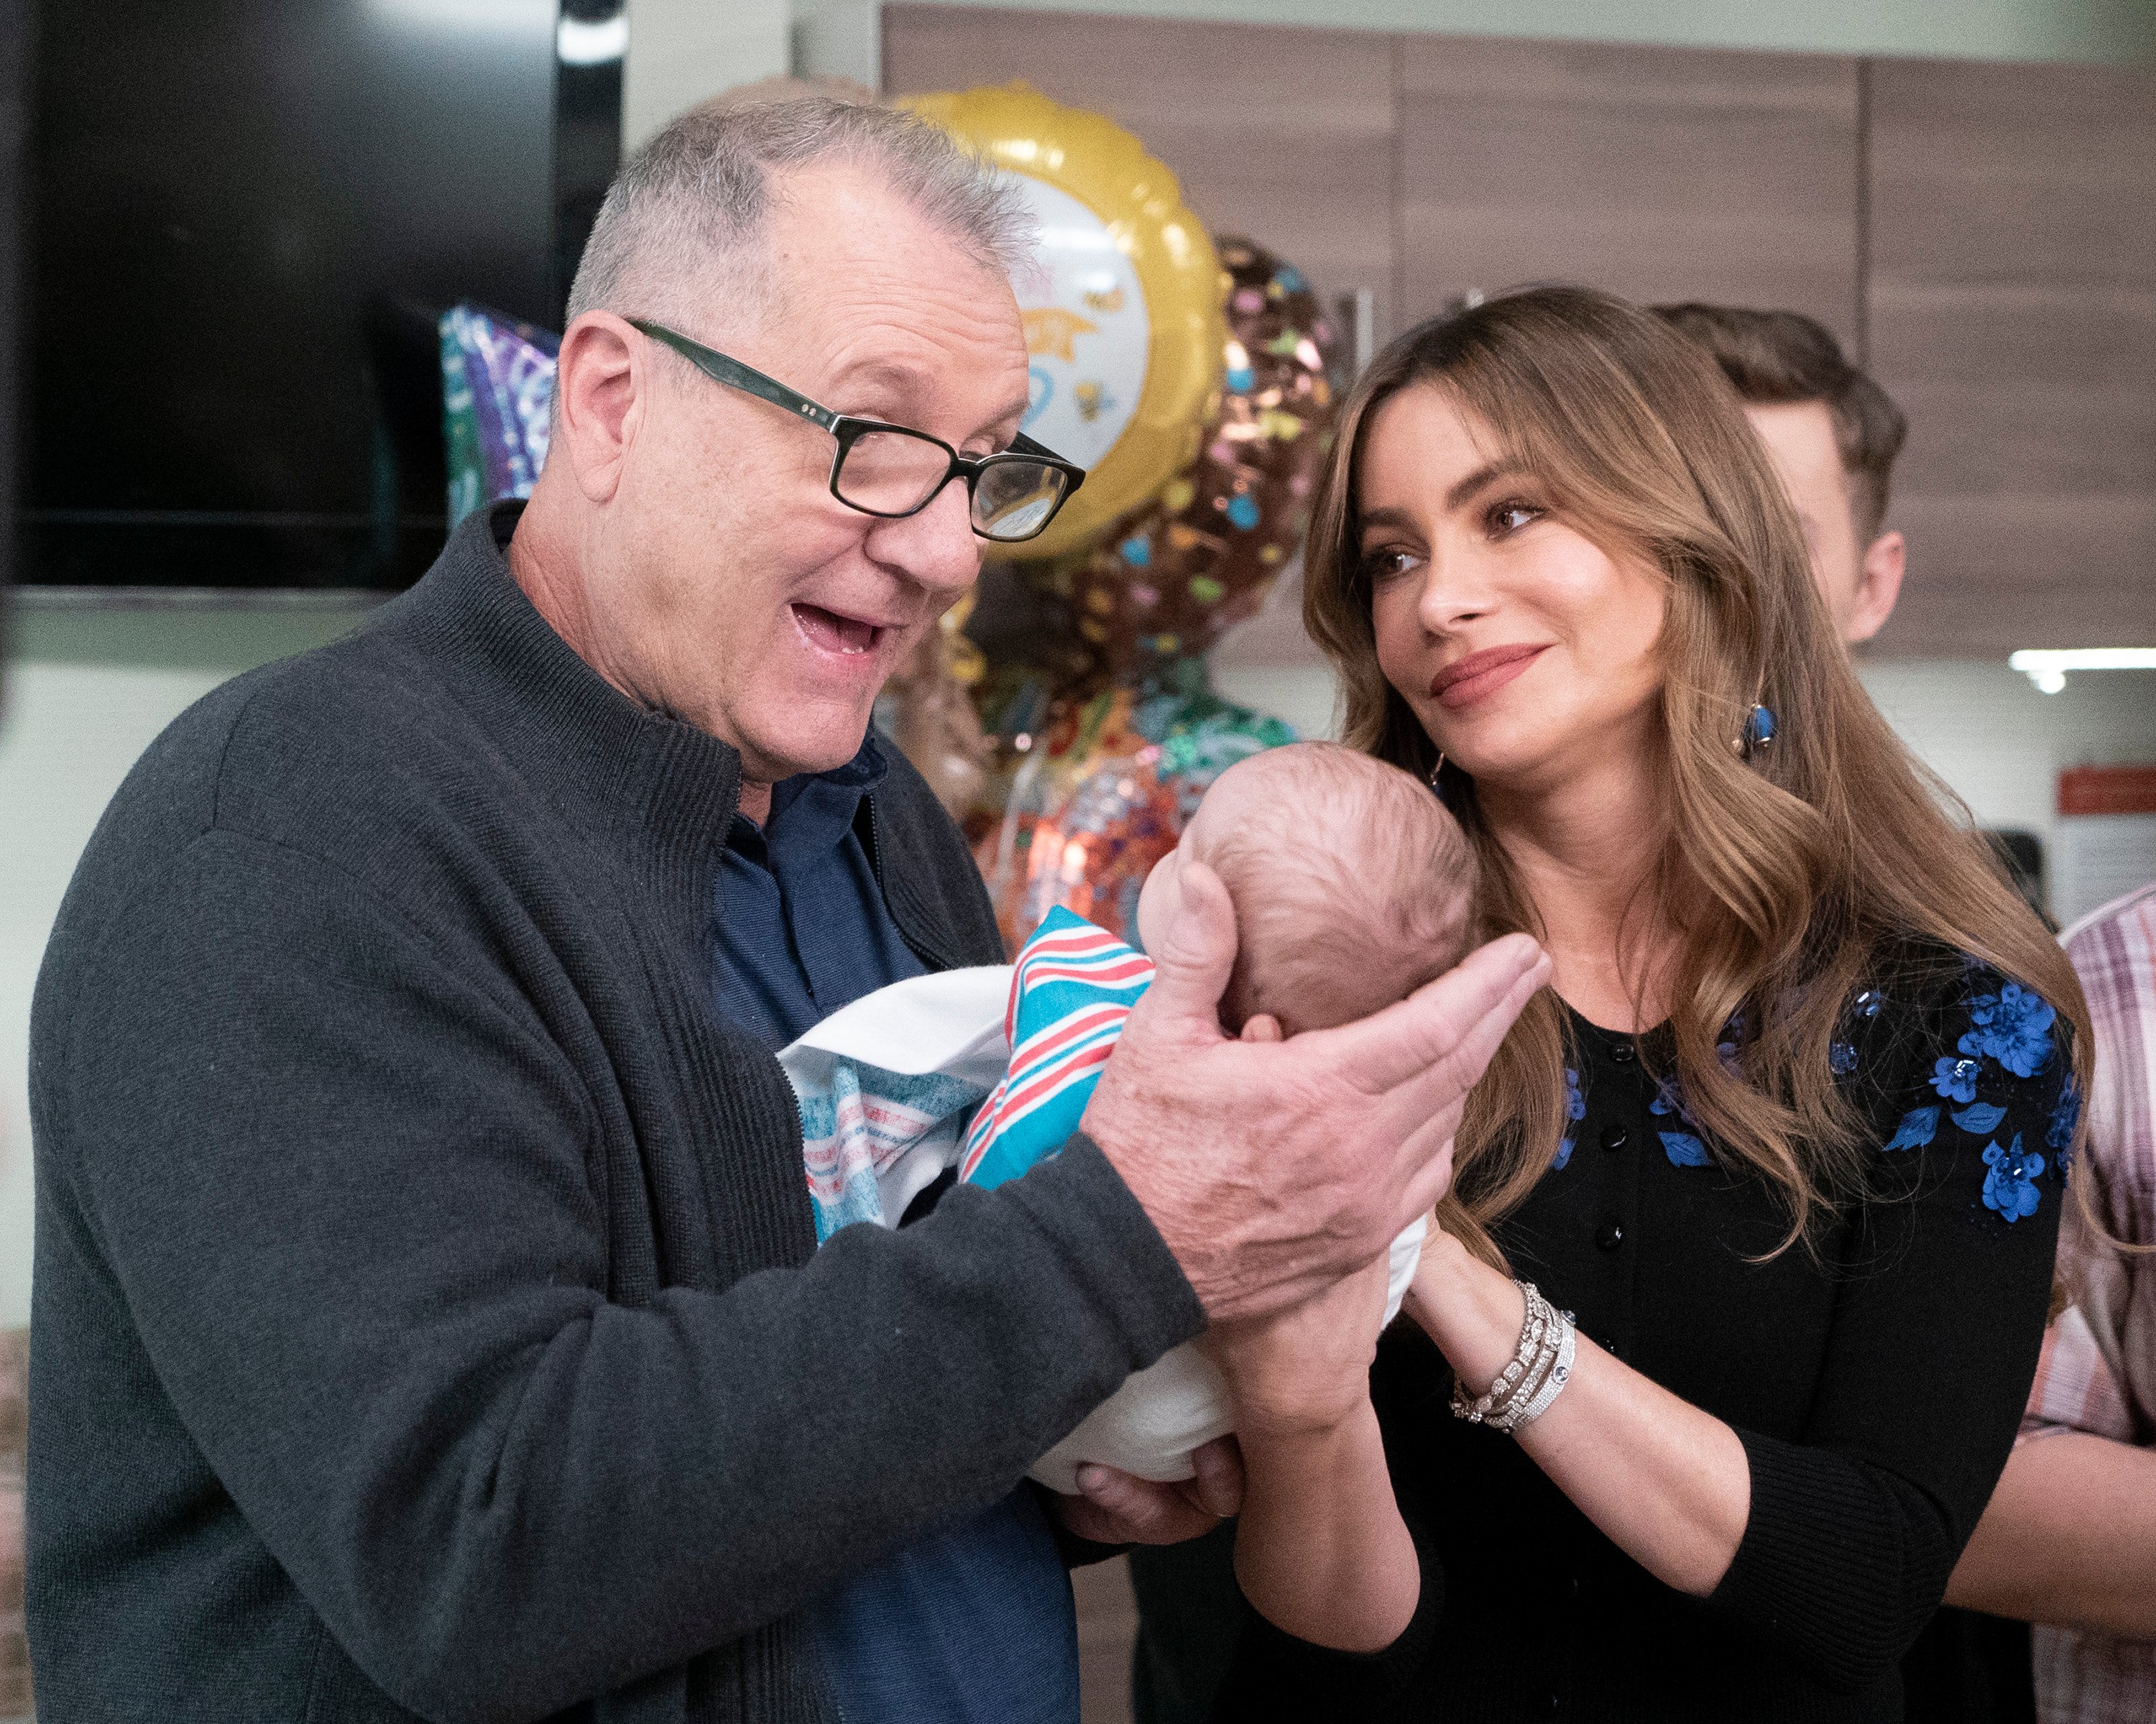 'Modern Family' Episode Titled 'A Year of Birthdays'